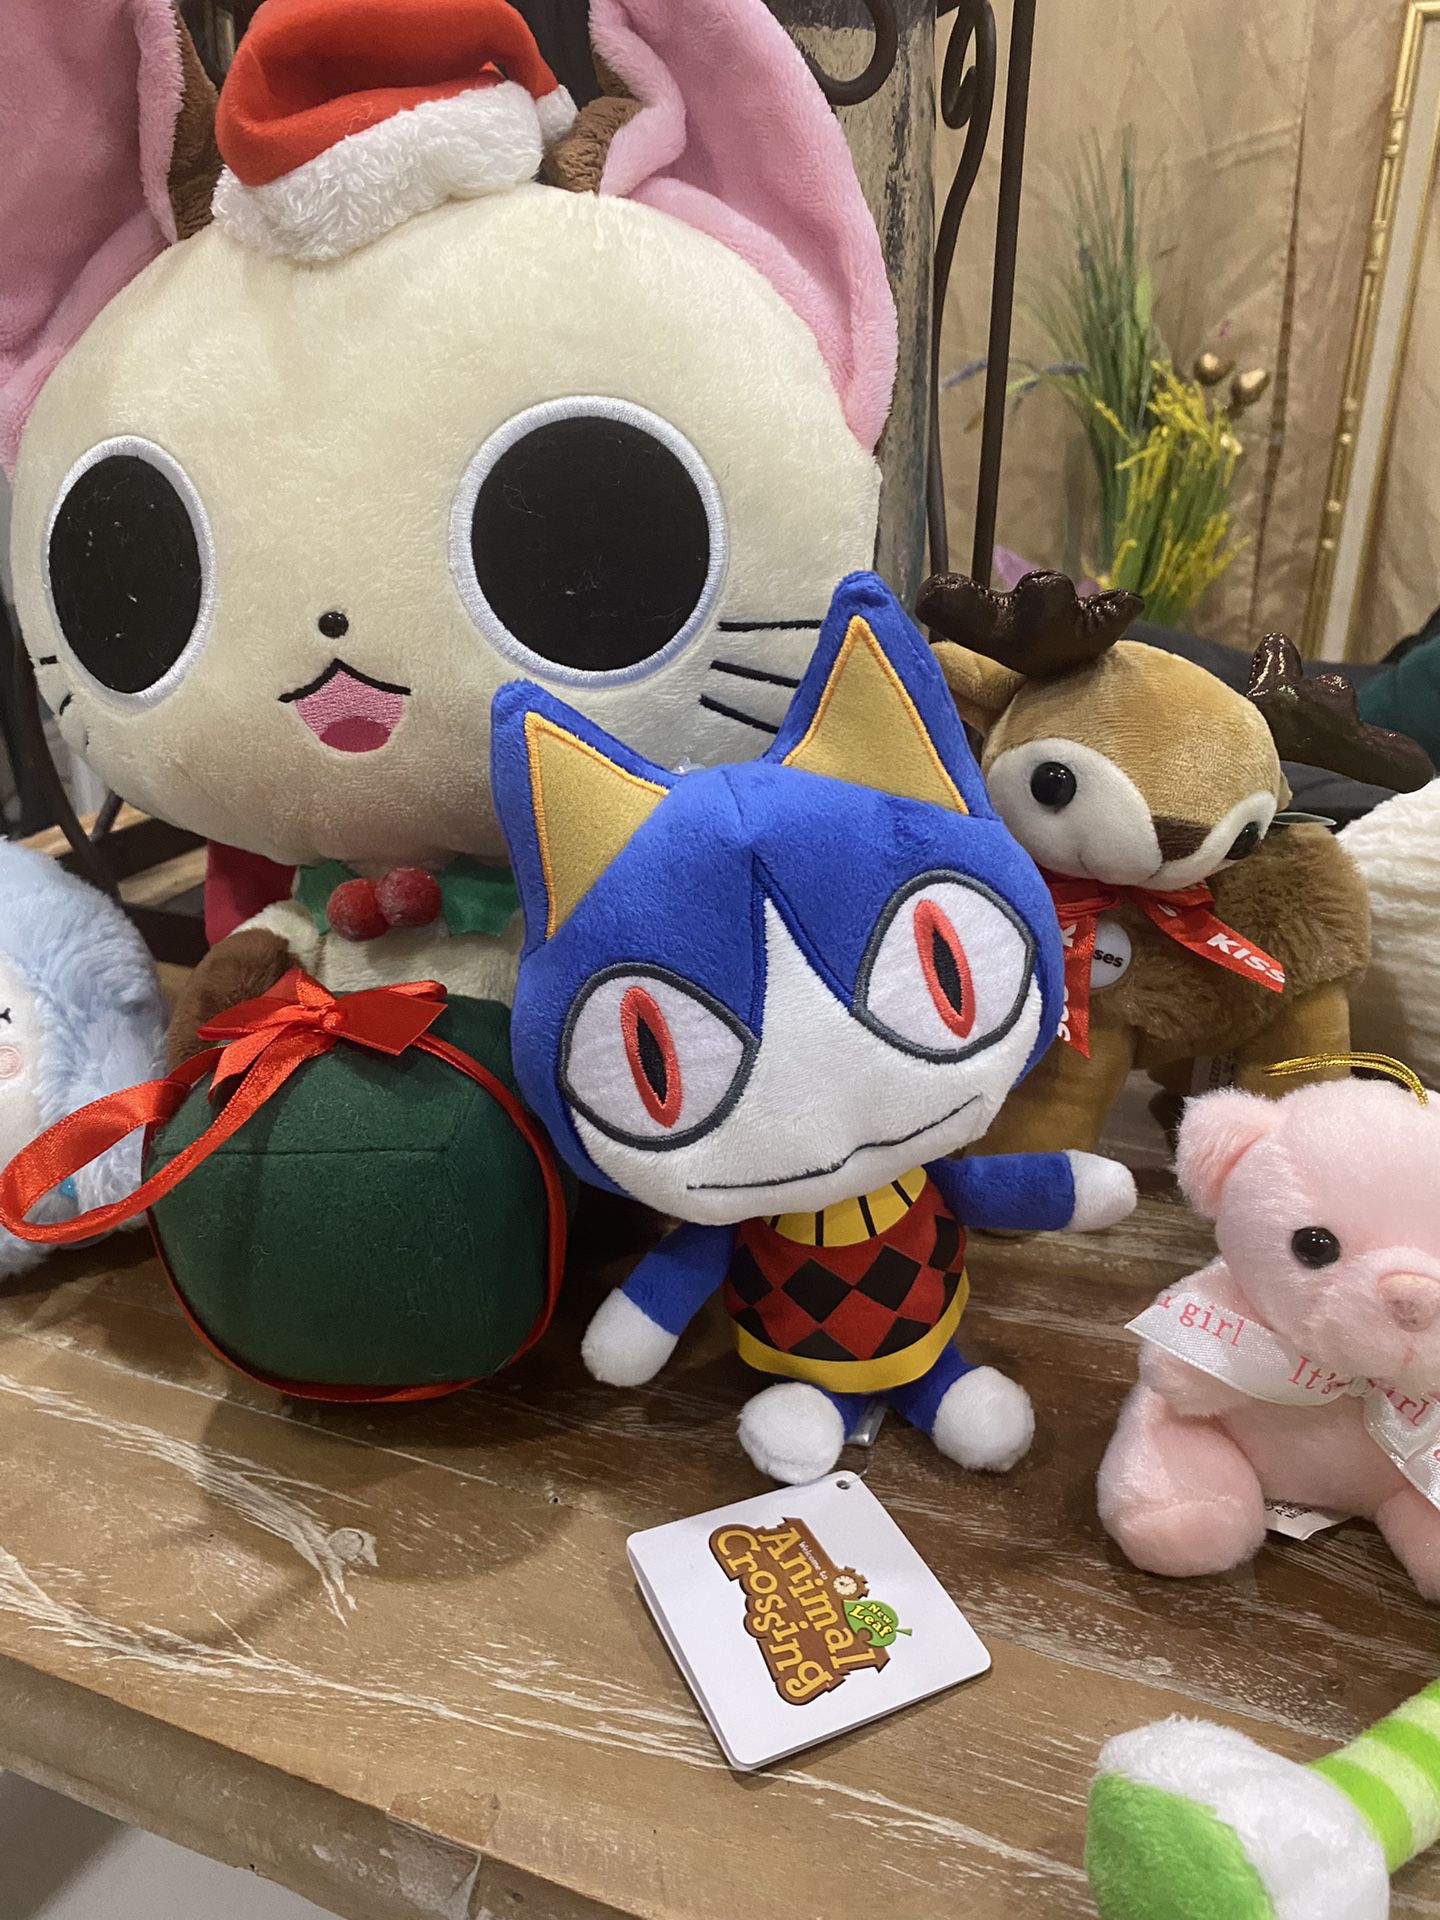 LOTS OF PLUSHIES!!!!